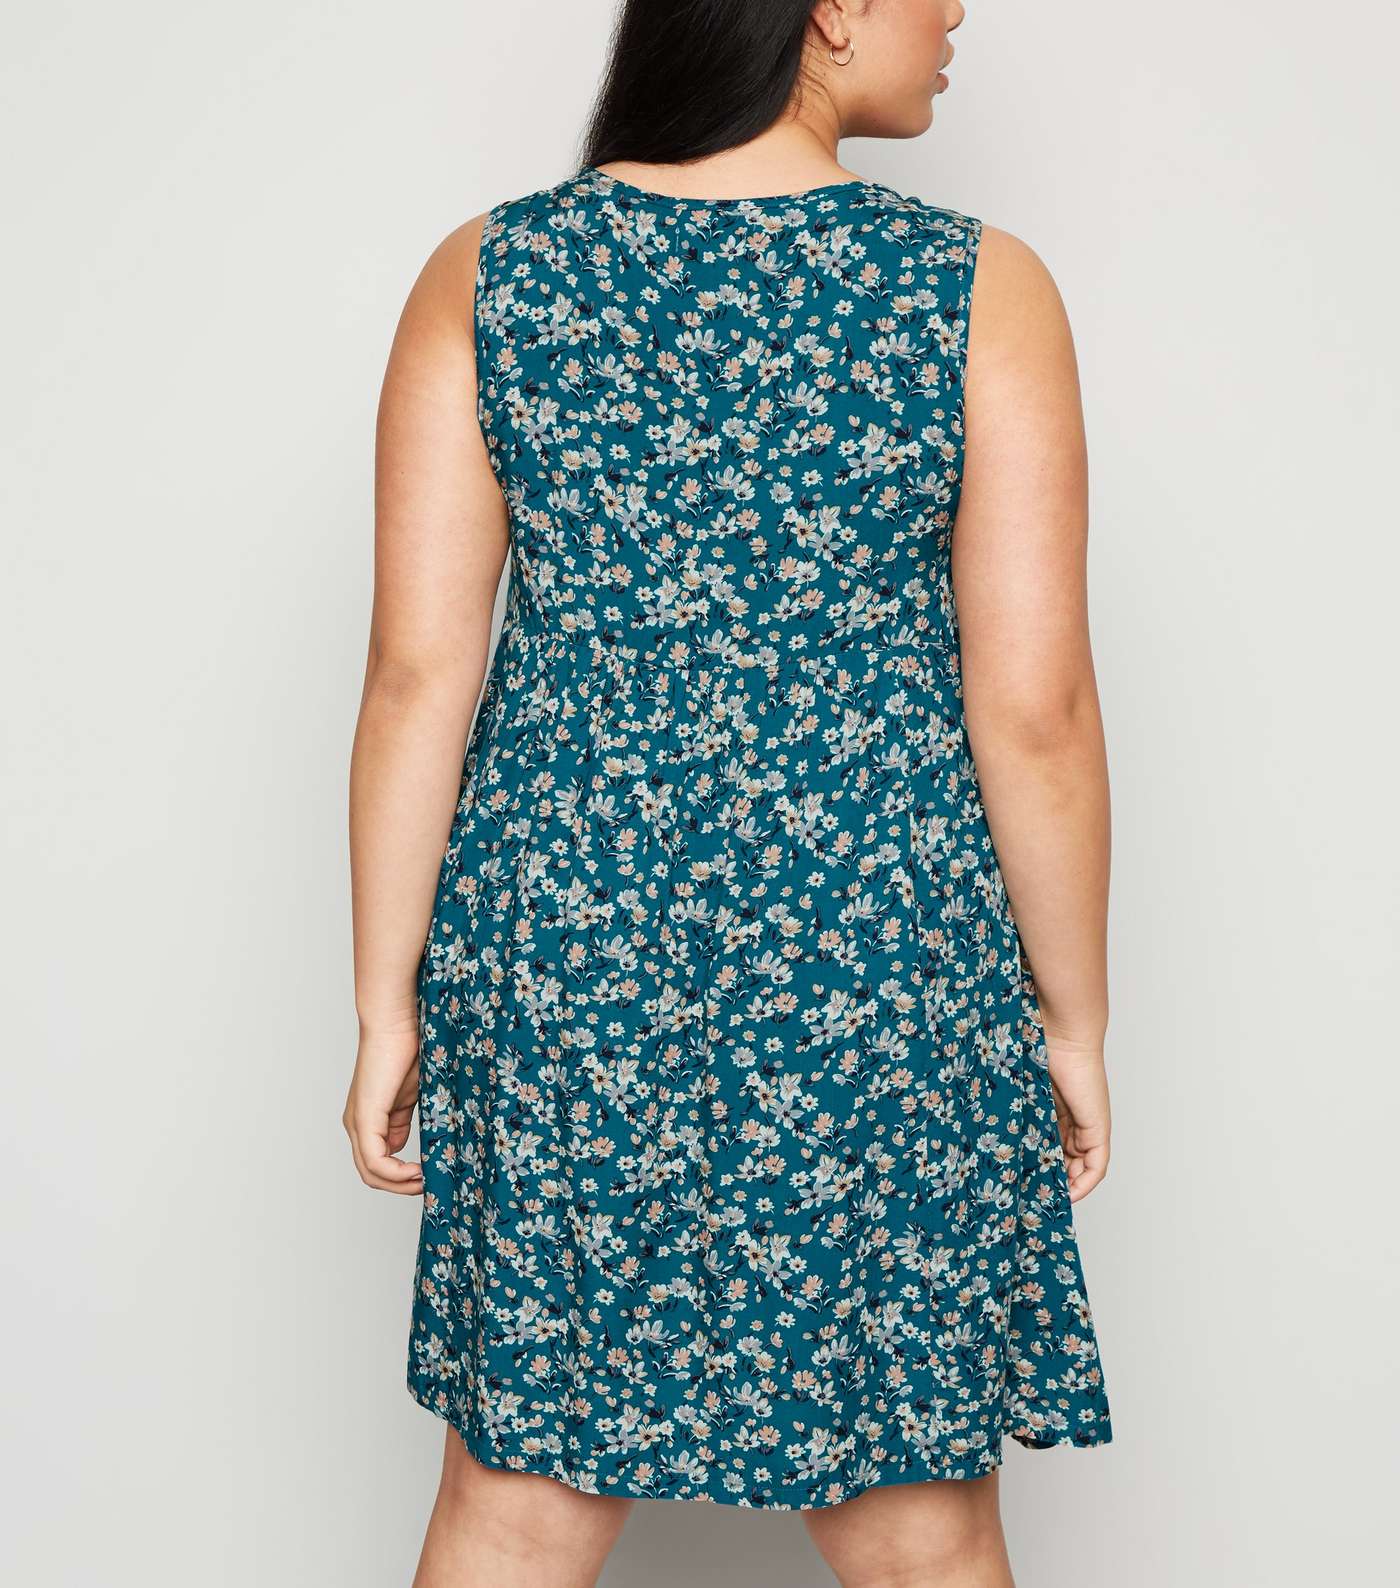 Apricot Curves Green Ditsy Floral Dress Image 3